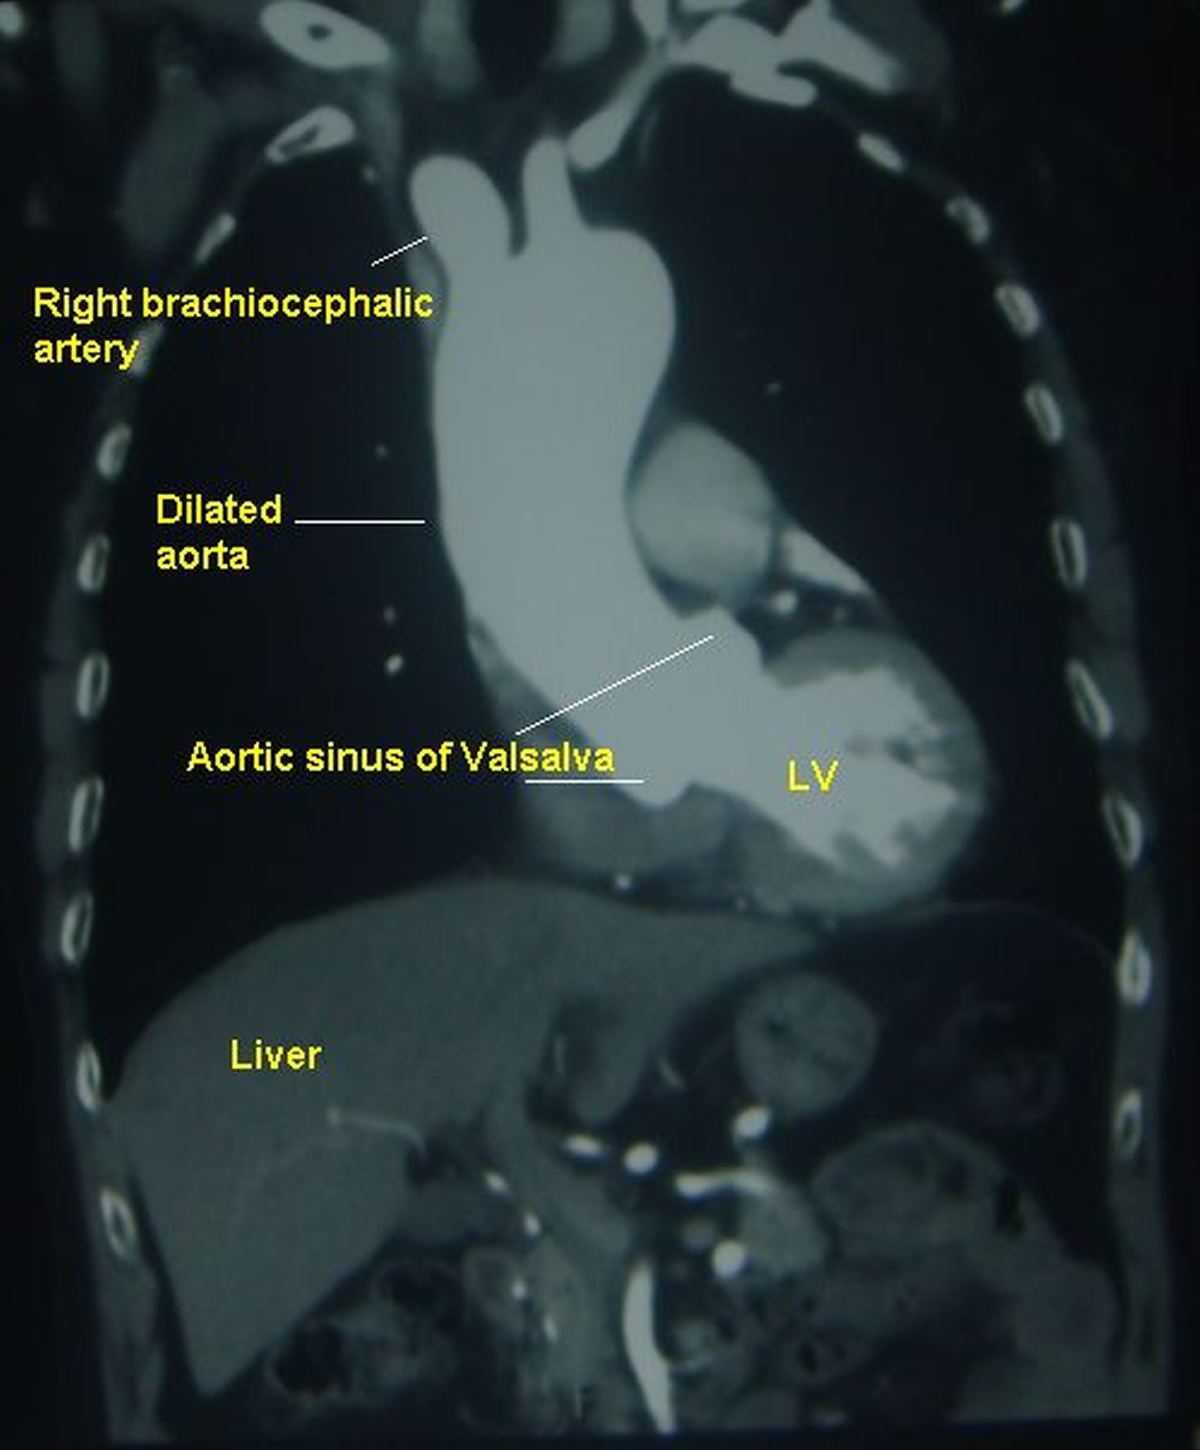 Dilated aorta on contrast enhanced CT scan